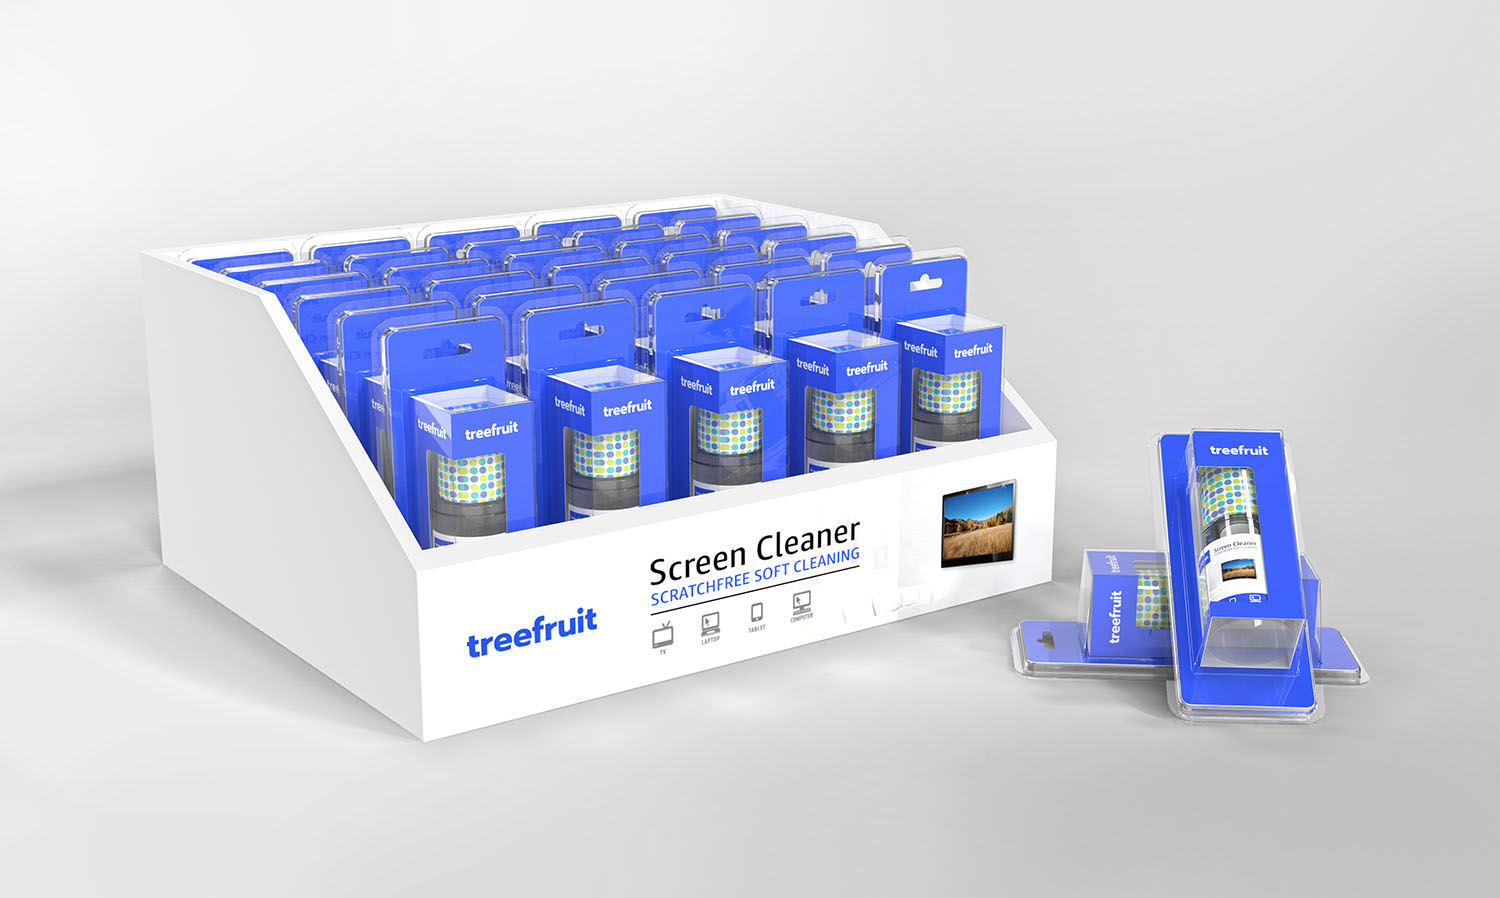 Screen Cleaner Counter-Top Display Unit